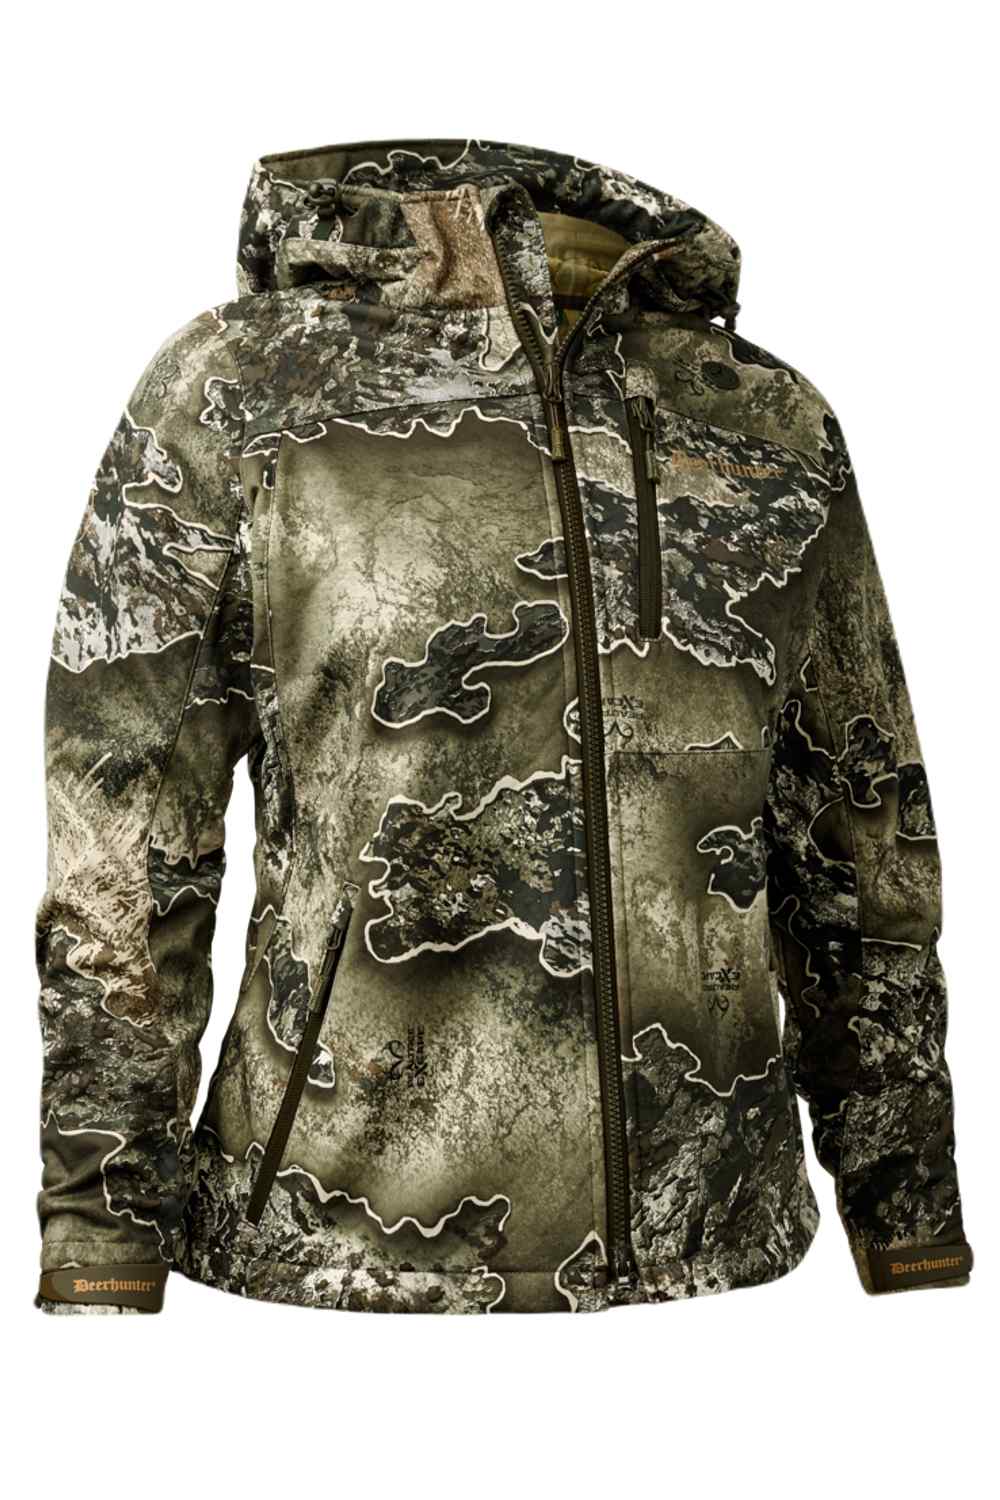 Deerhunter Lady Excape Softshell Jacket In RealTree Excape 